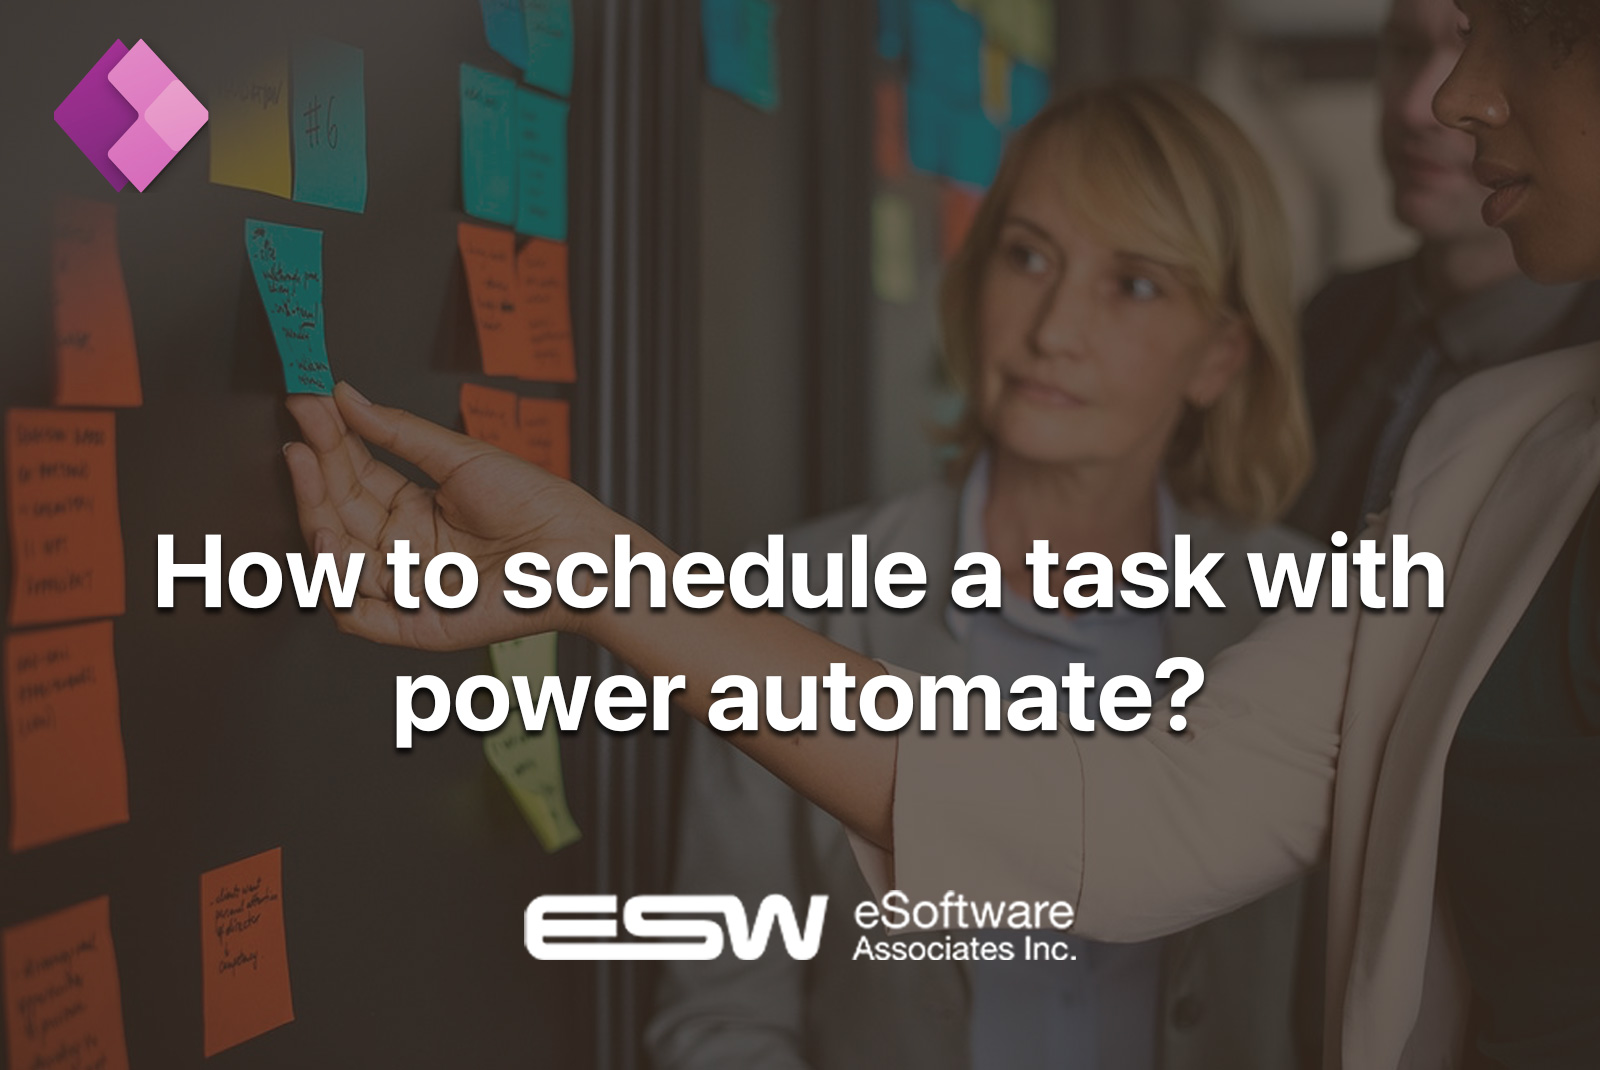 How to schedule a task with power automate?